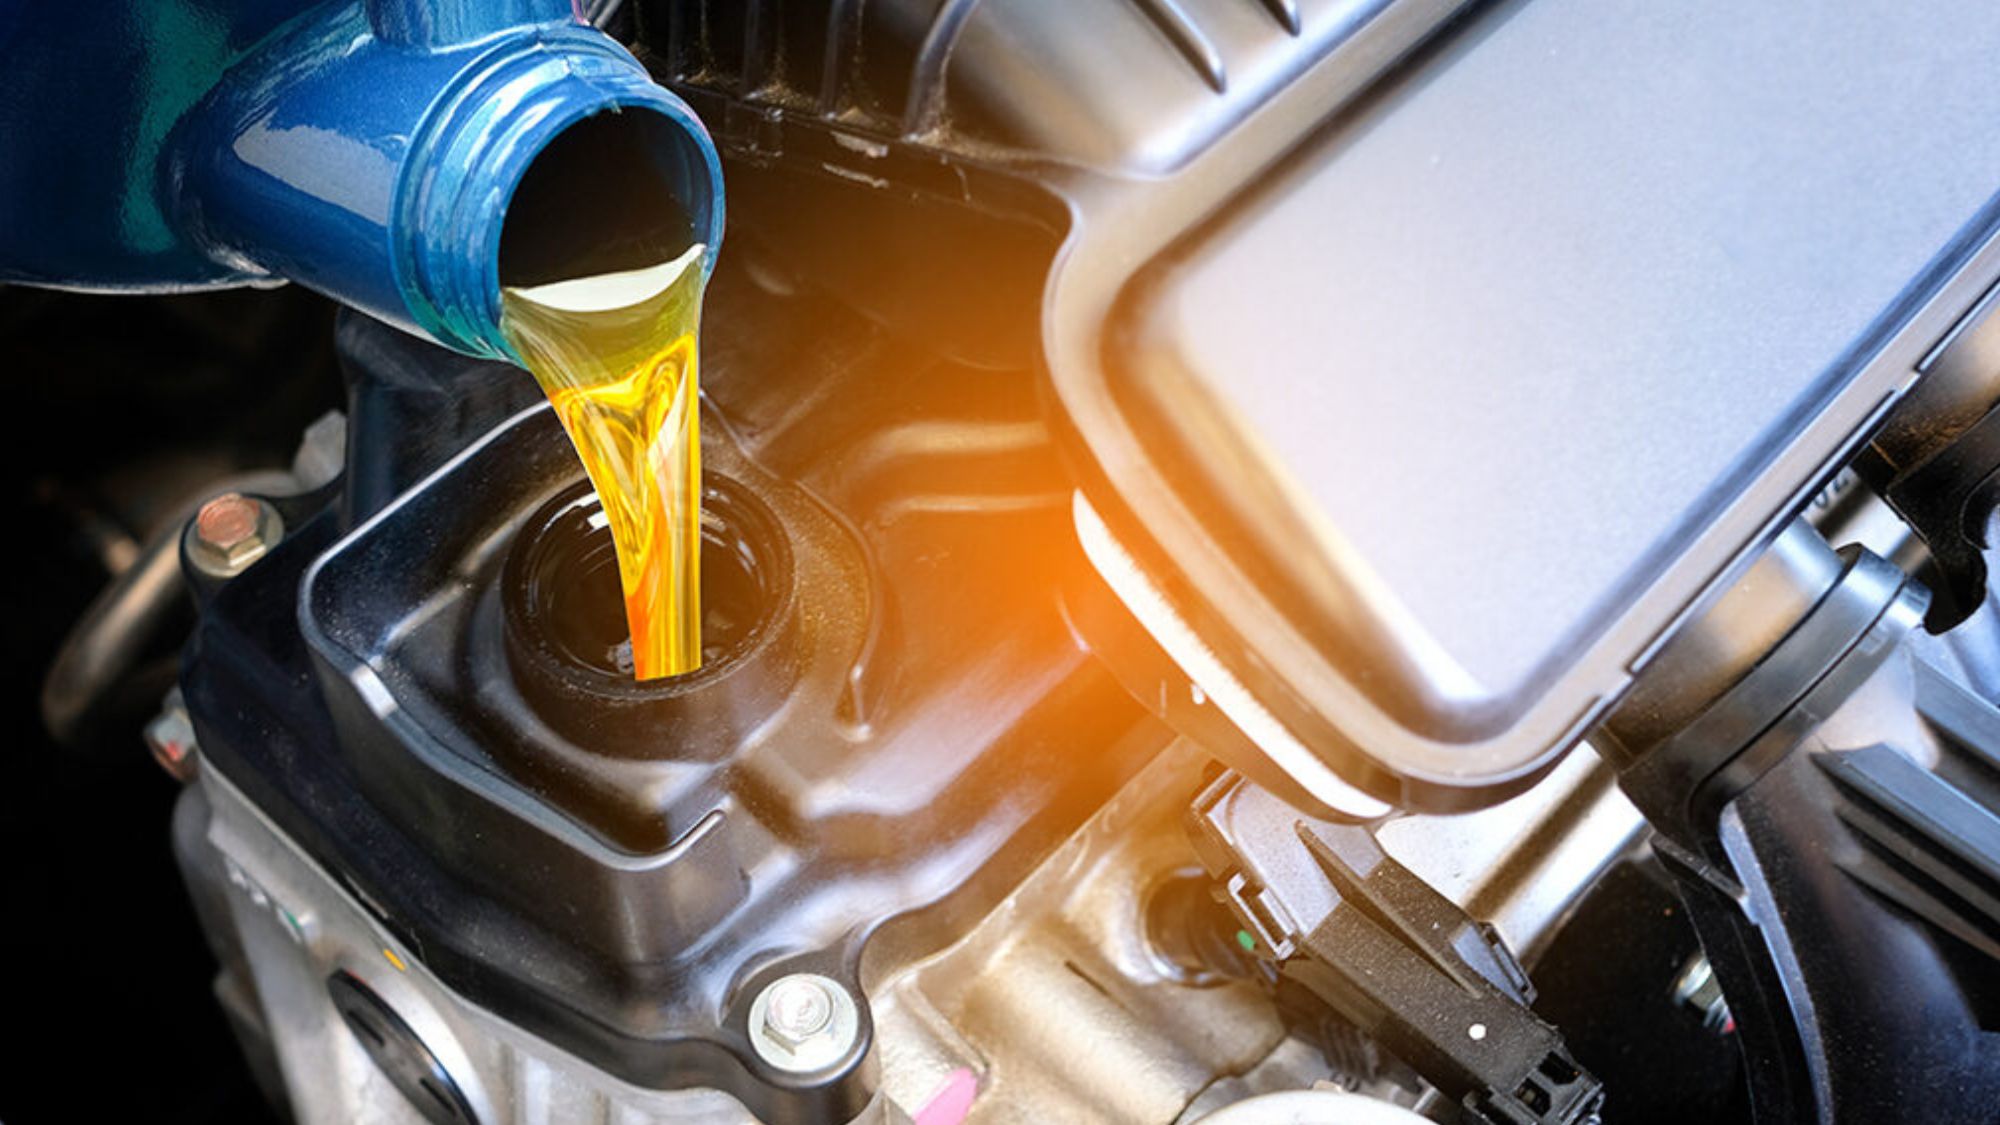 A man putting motor oil in his car engine to maintain vehicle hydration and avoid car breakdowns